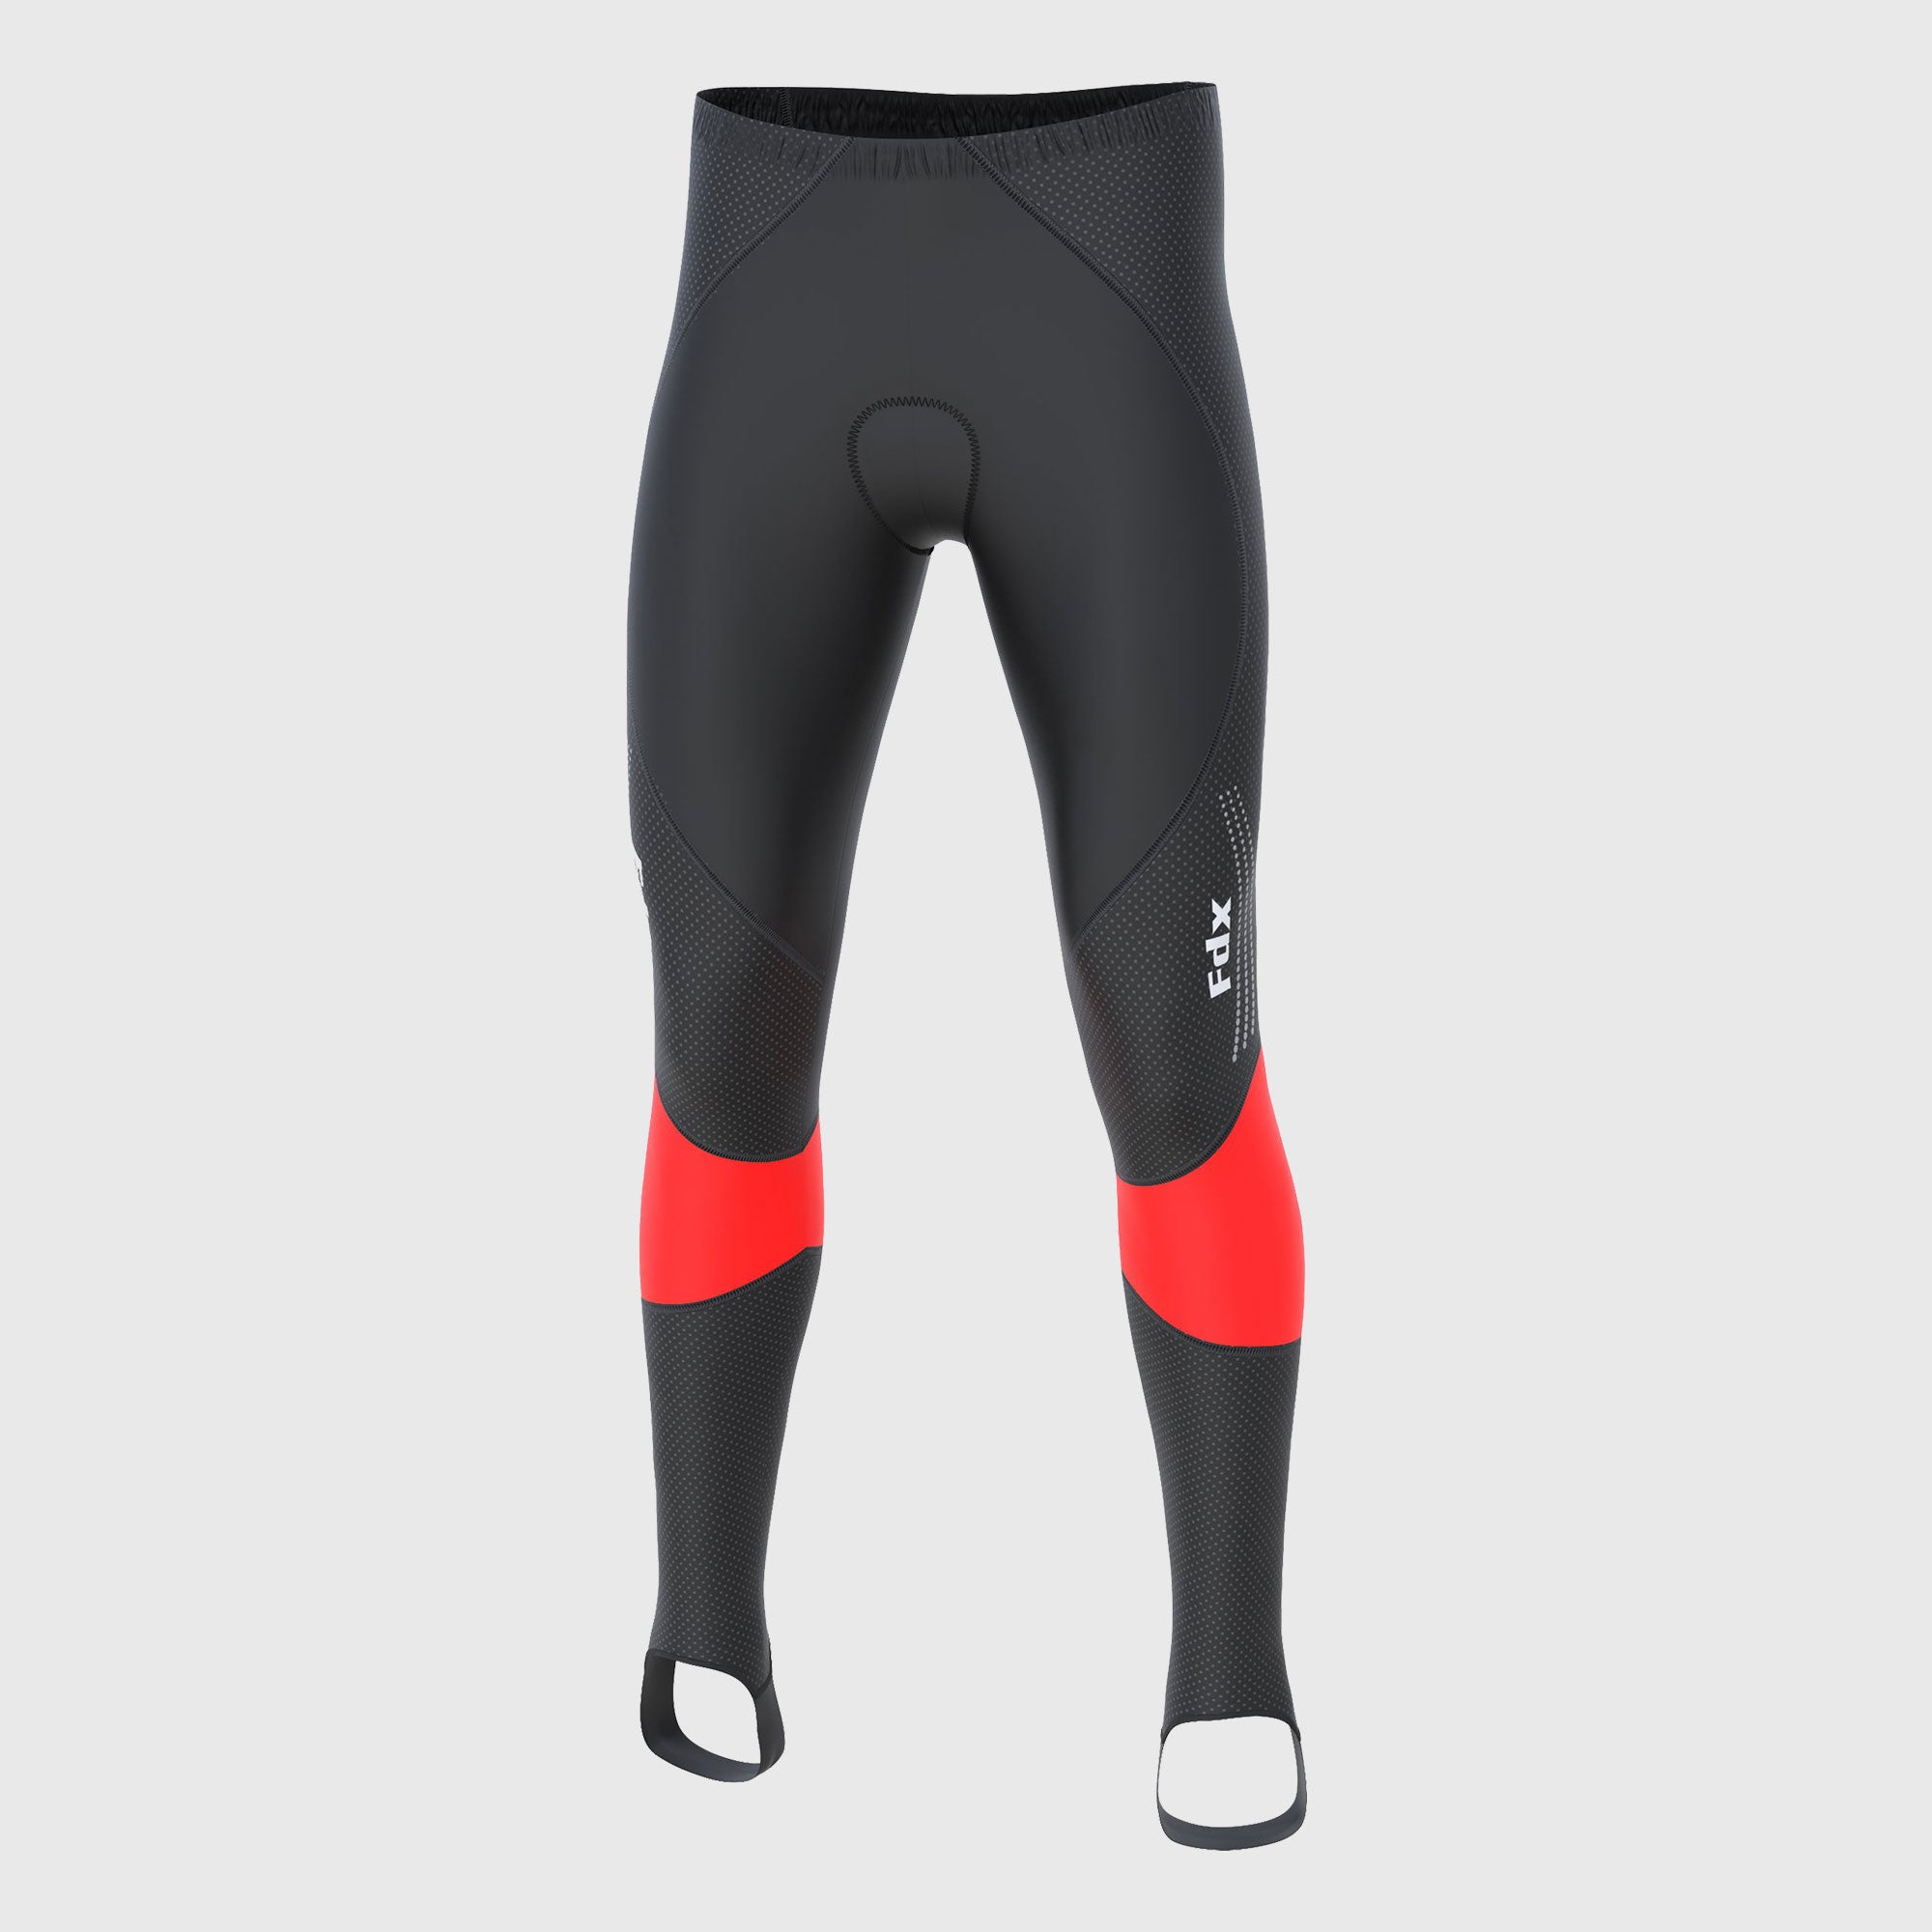 Fdx All Day Men's Padded Winter Cycling Tights Blue, Black & Red | FDX  Sports® - FDX Sports US